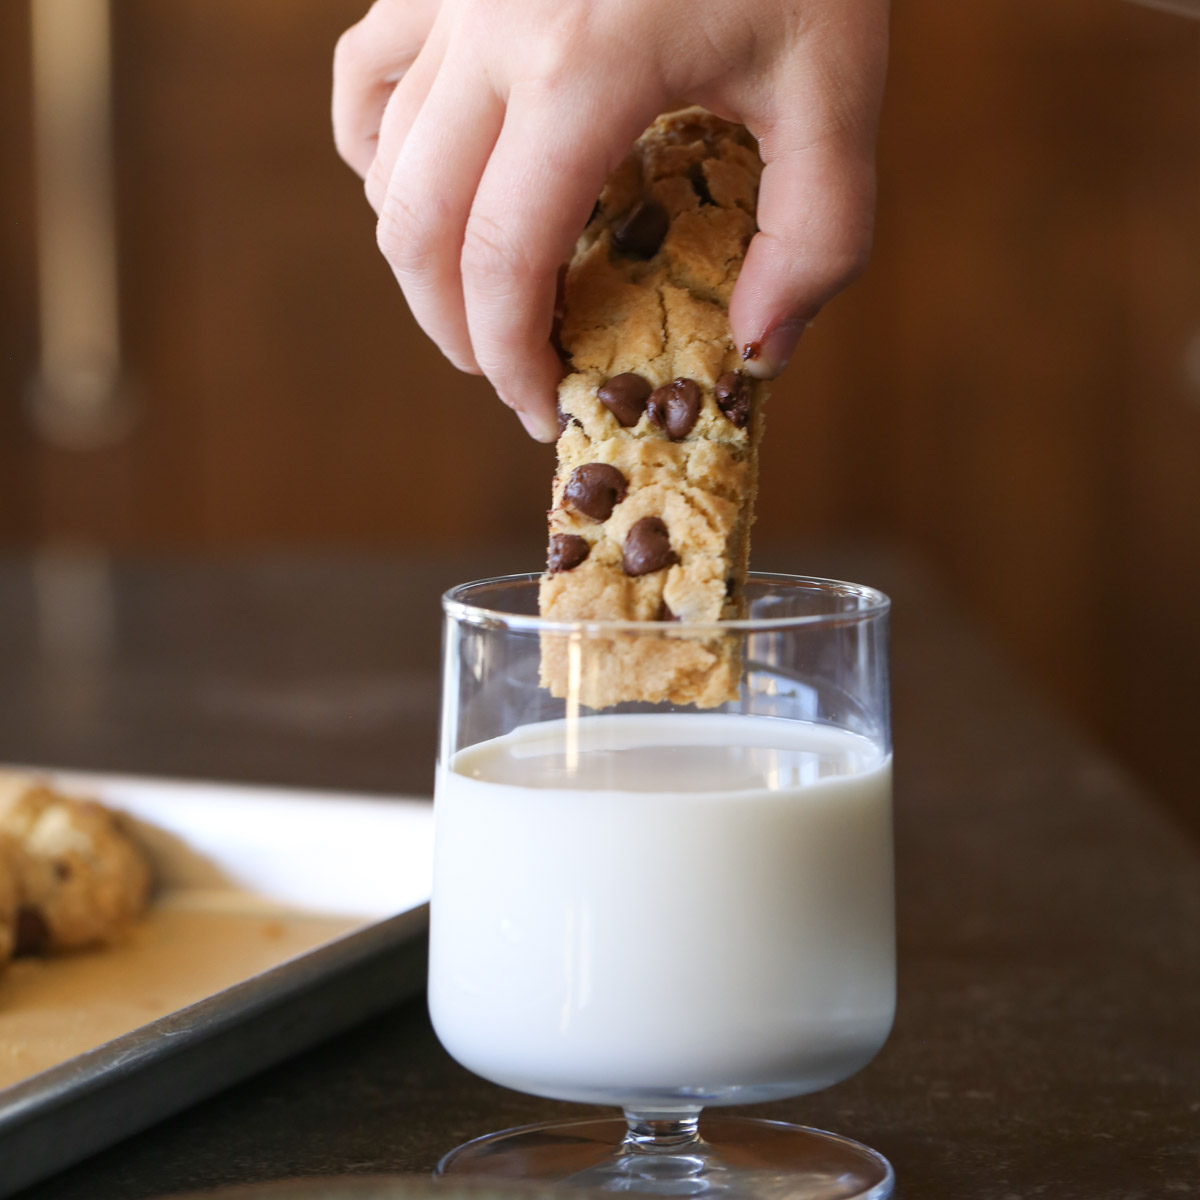 A hand dipping a Chocolate Chip Cookie Stick into a glass of milk.  